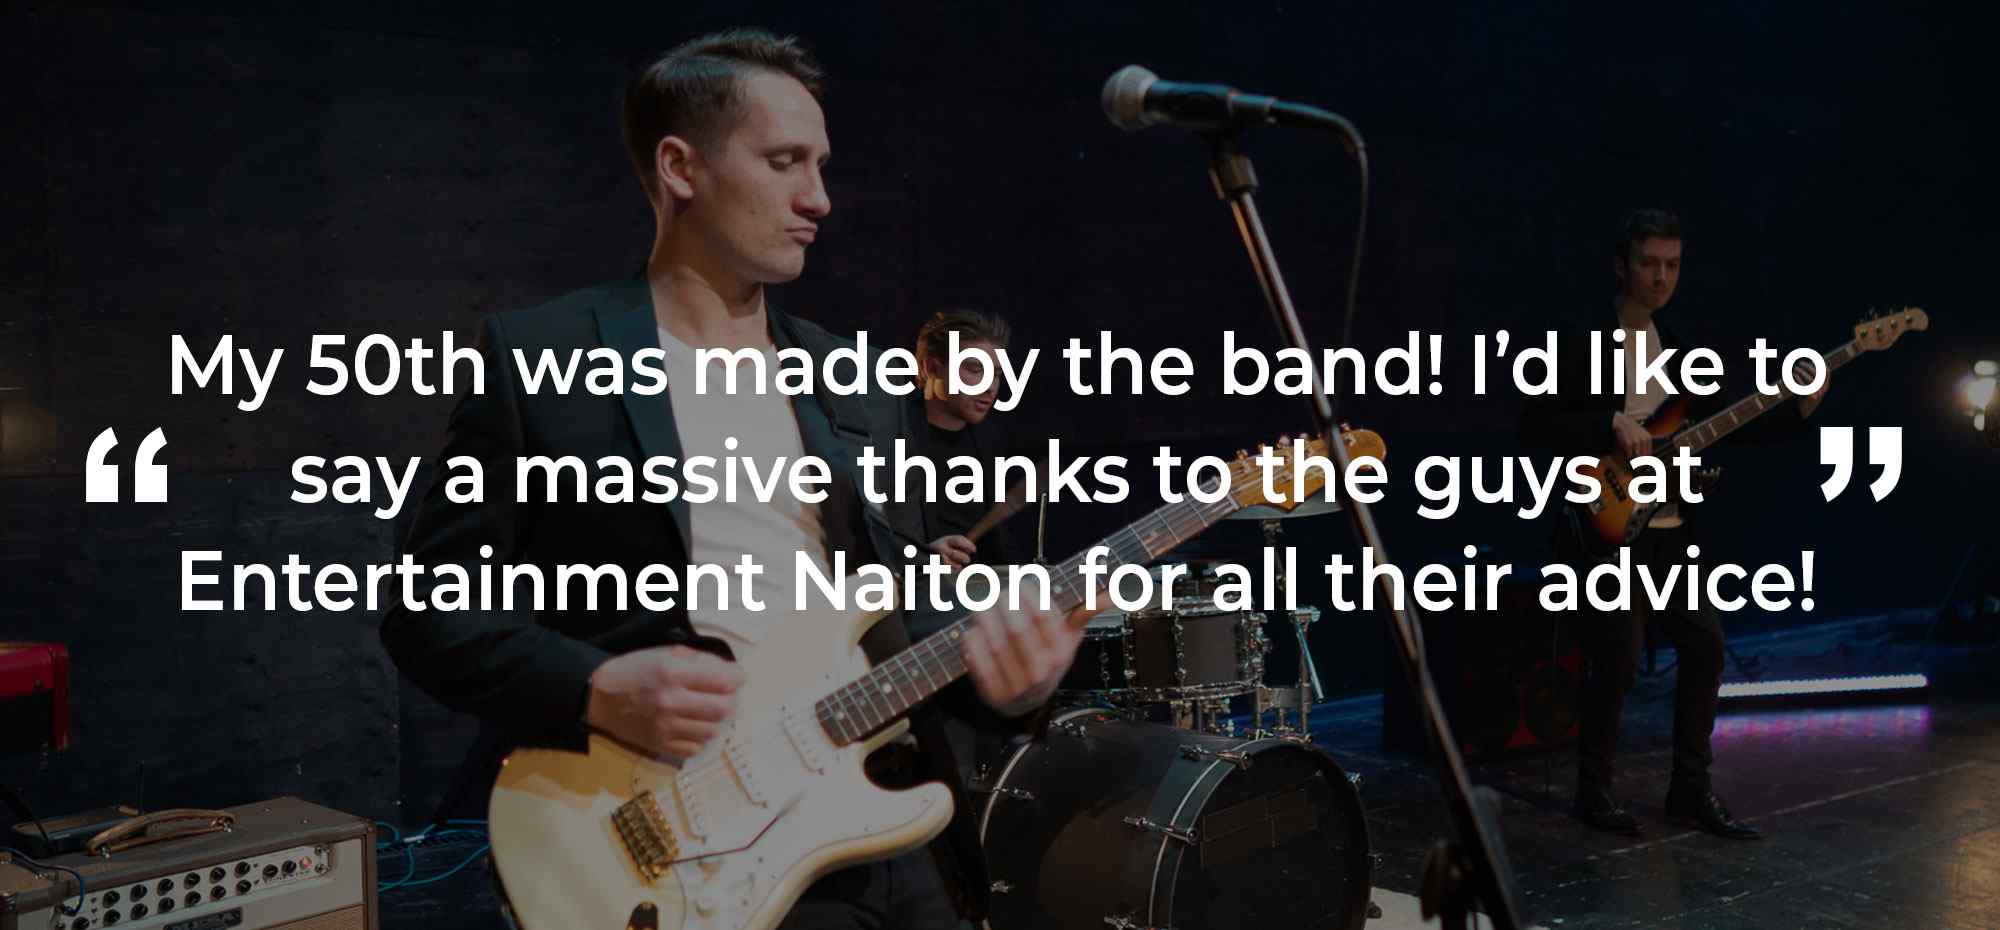 Client Review of a Party Band Buckinghashire